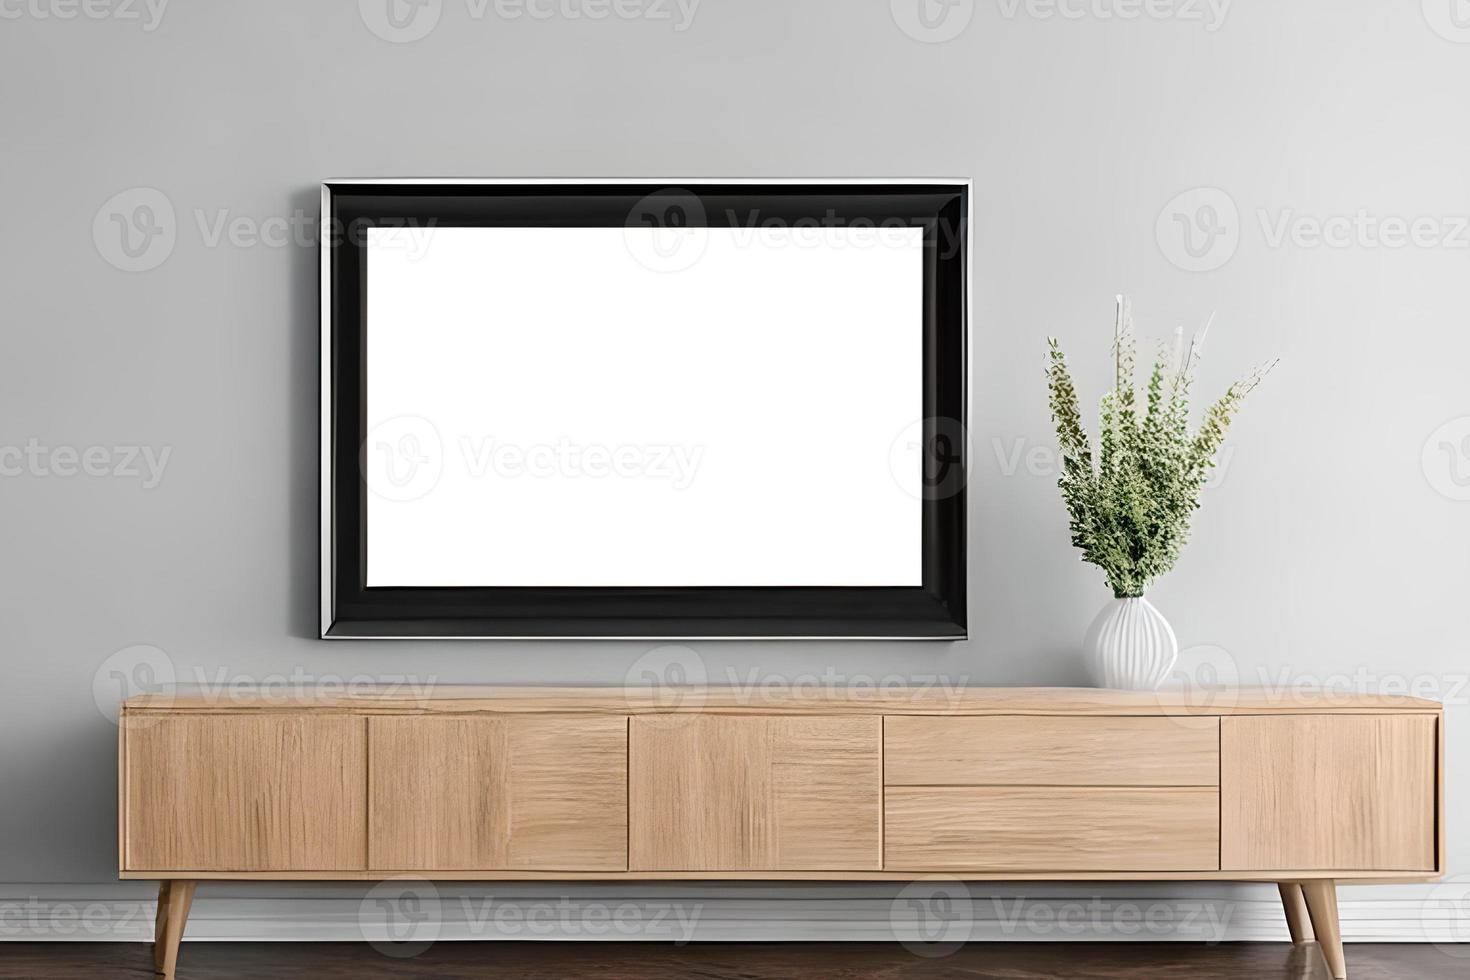 A mockup simple photo frame at the wall and a cabinet drawer.